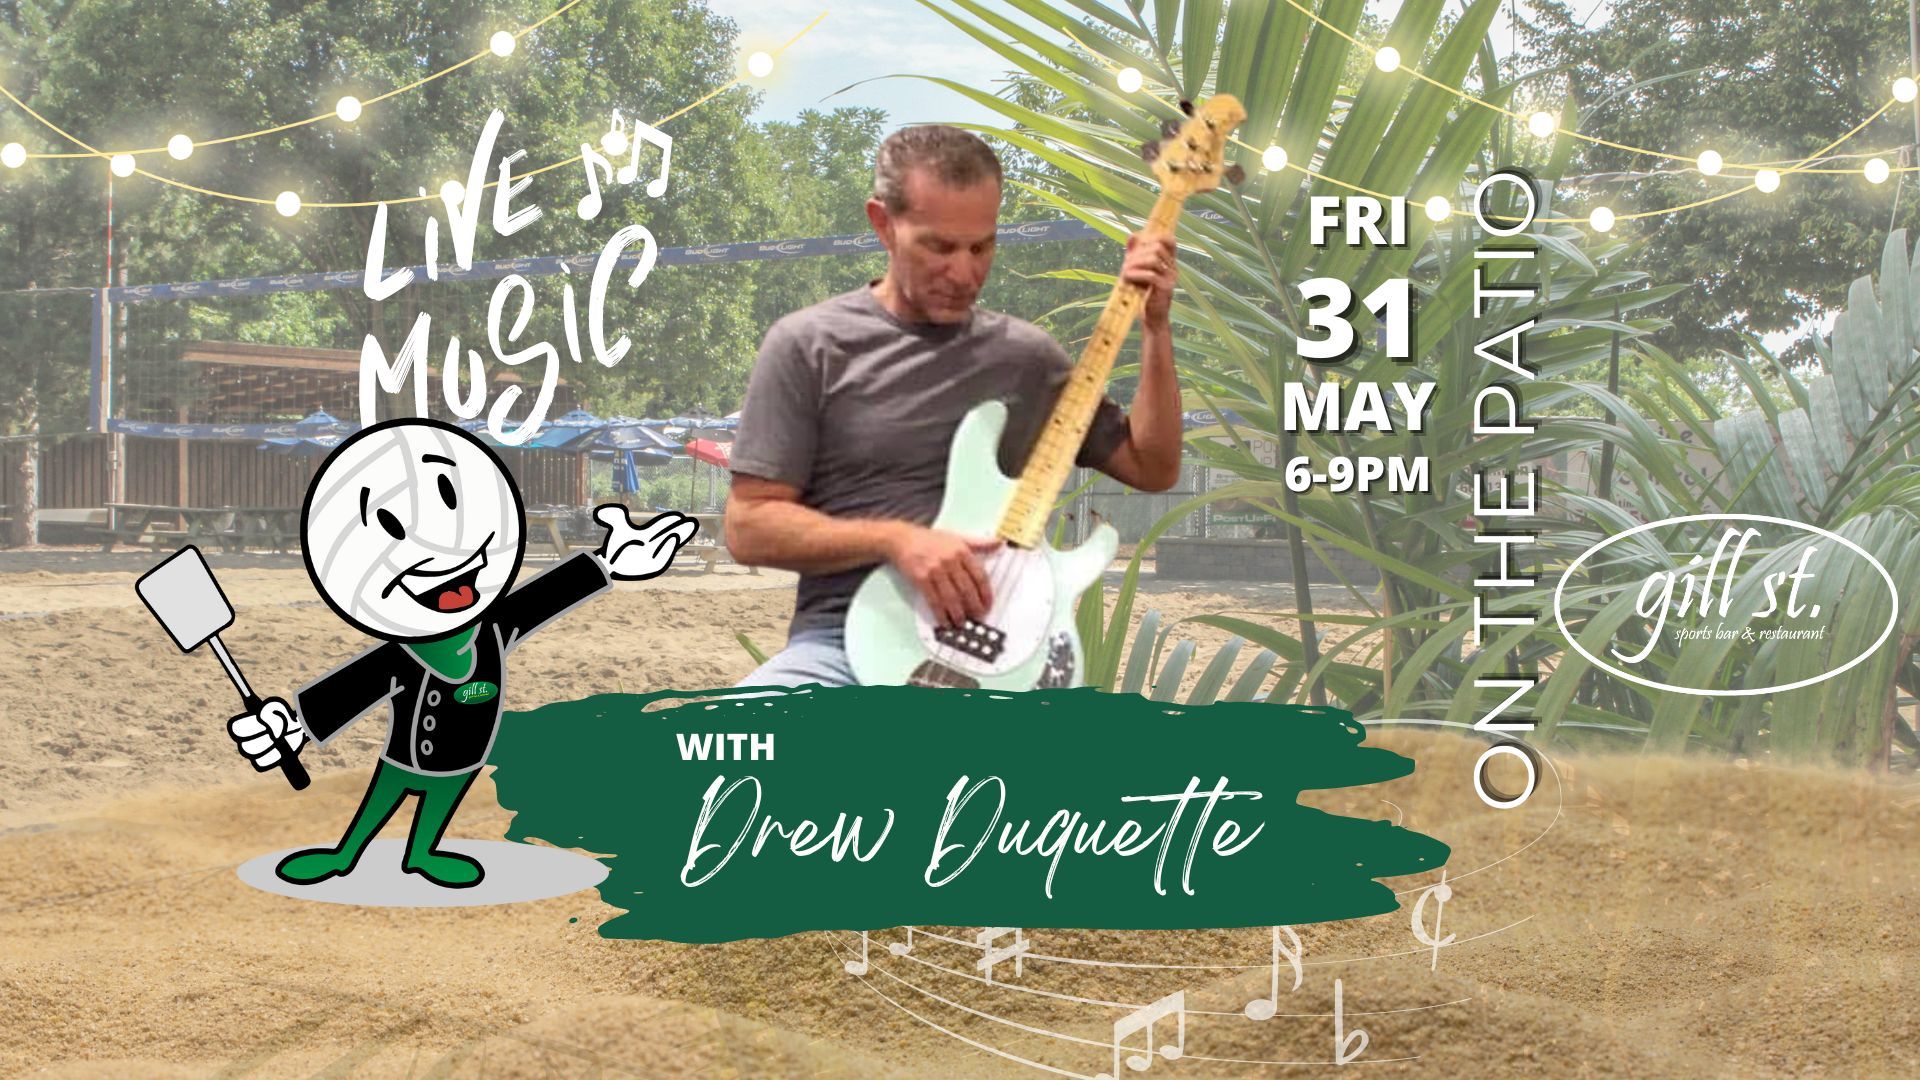 Live Music with Drew Duquette